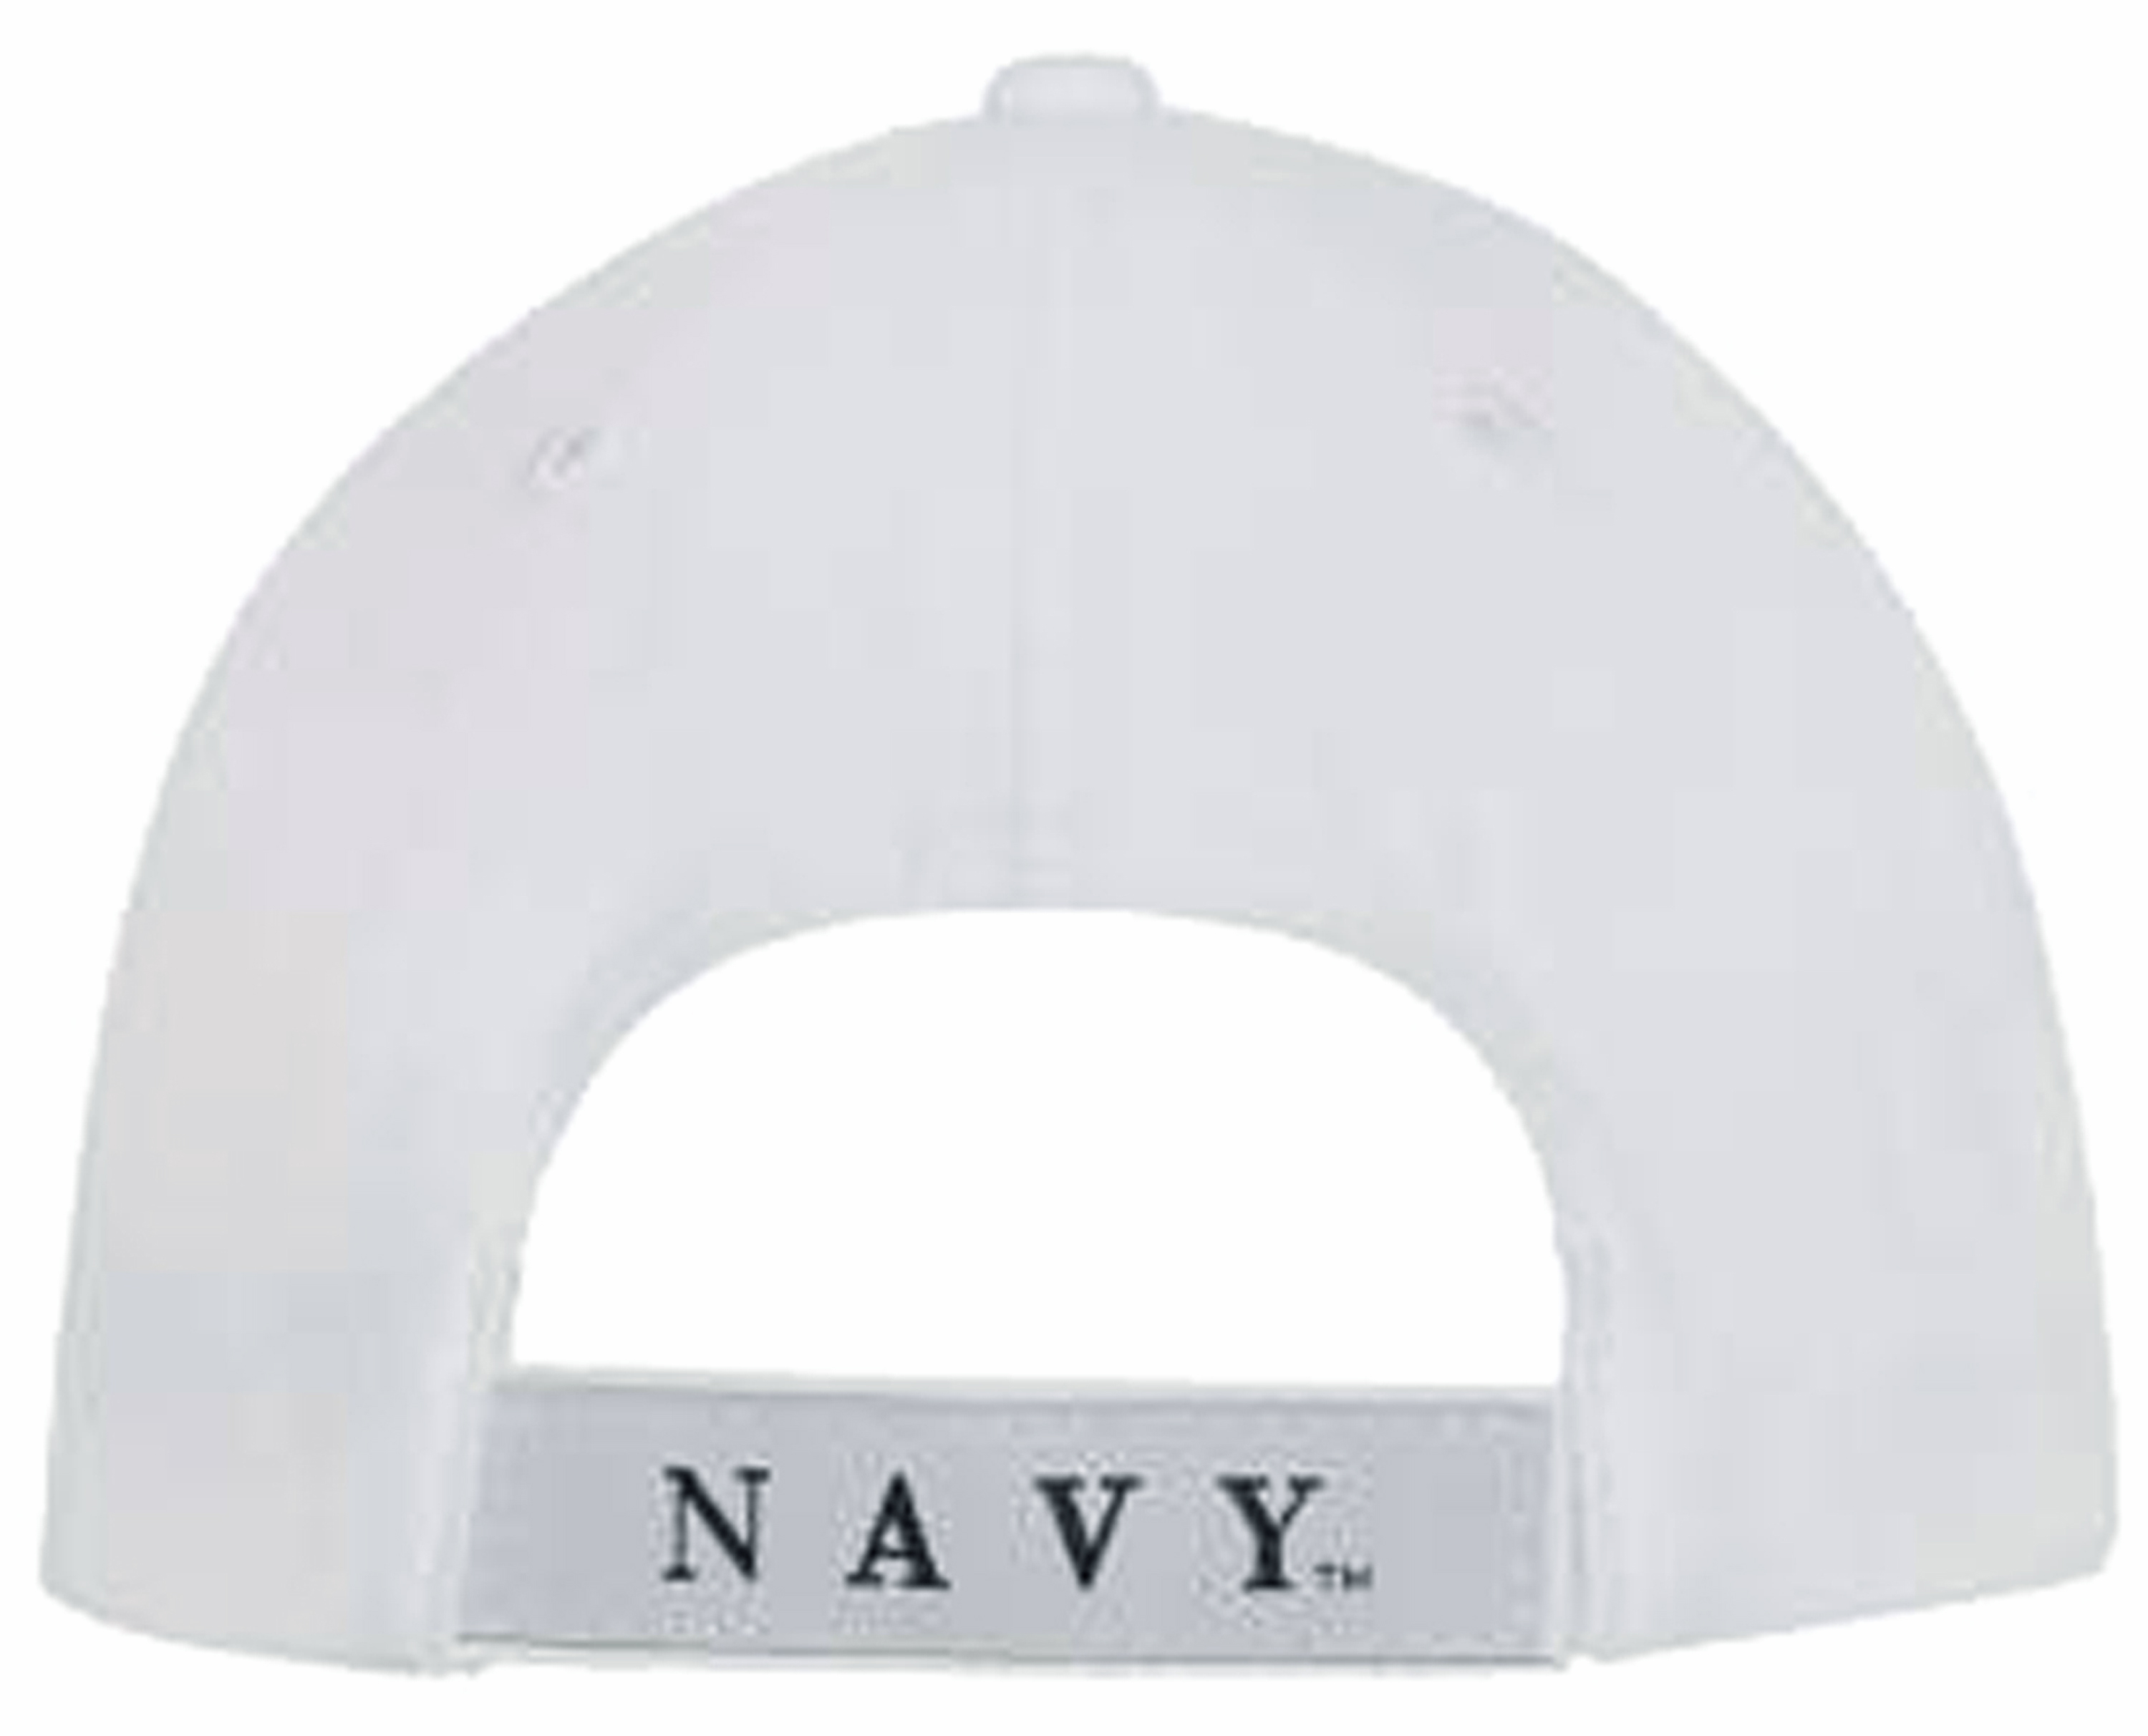 White Navy Veteran Baseball Cap Vet Embroidered Blue Letters, Men WomenOne Size Adjustable Relaxed Fit for Medium, Large, XL and Some XXL - image 4 of 5